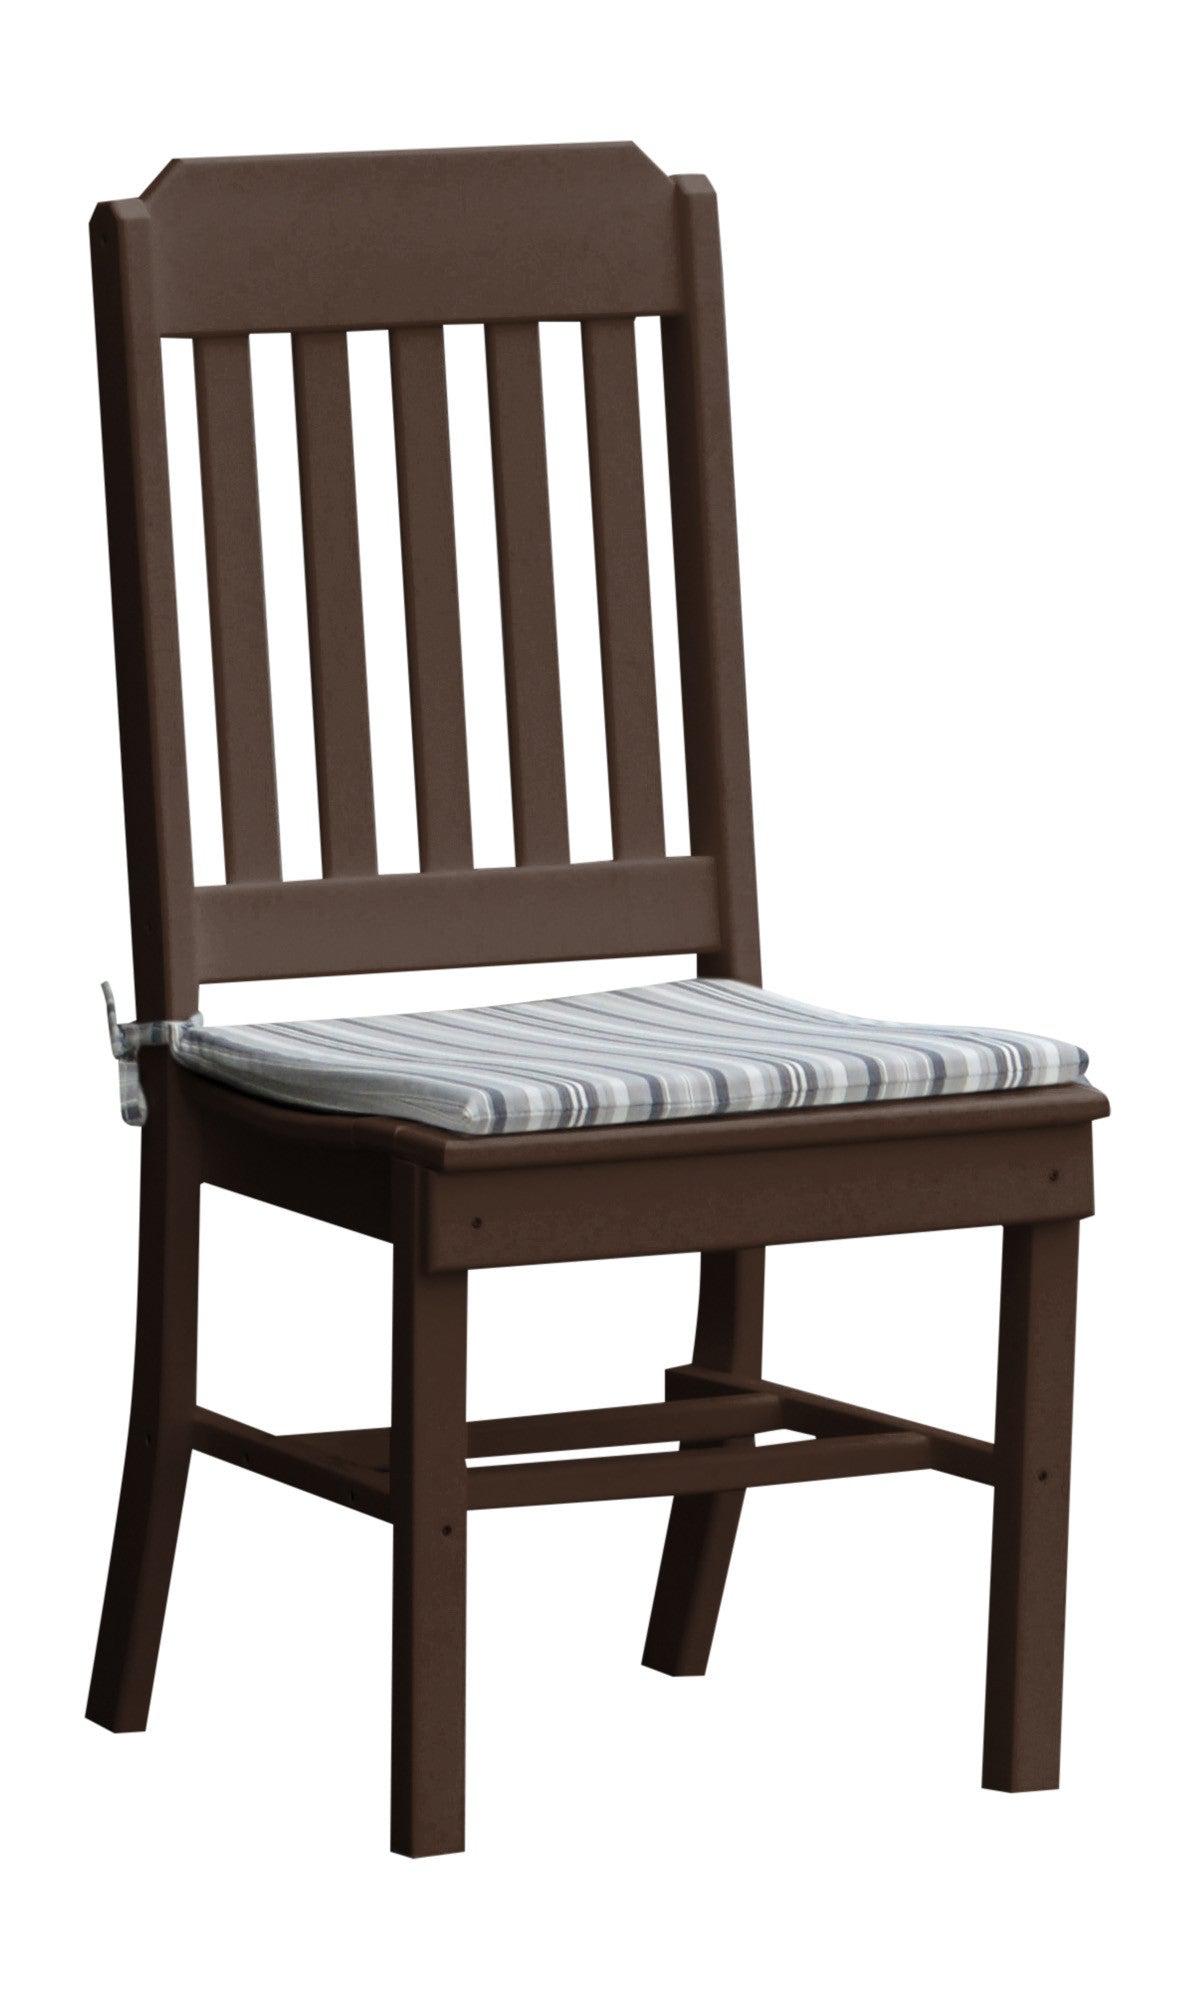 A&L Furniture Company Recycled Plastic Traditional Dining Chair - Tudor Brown